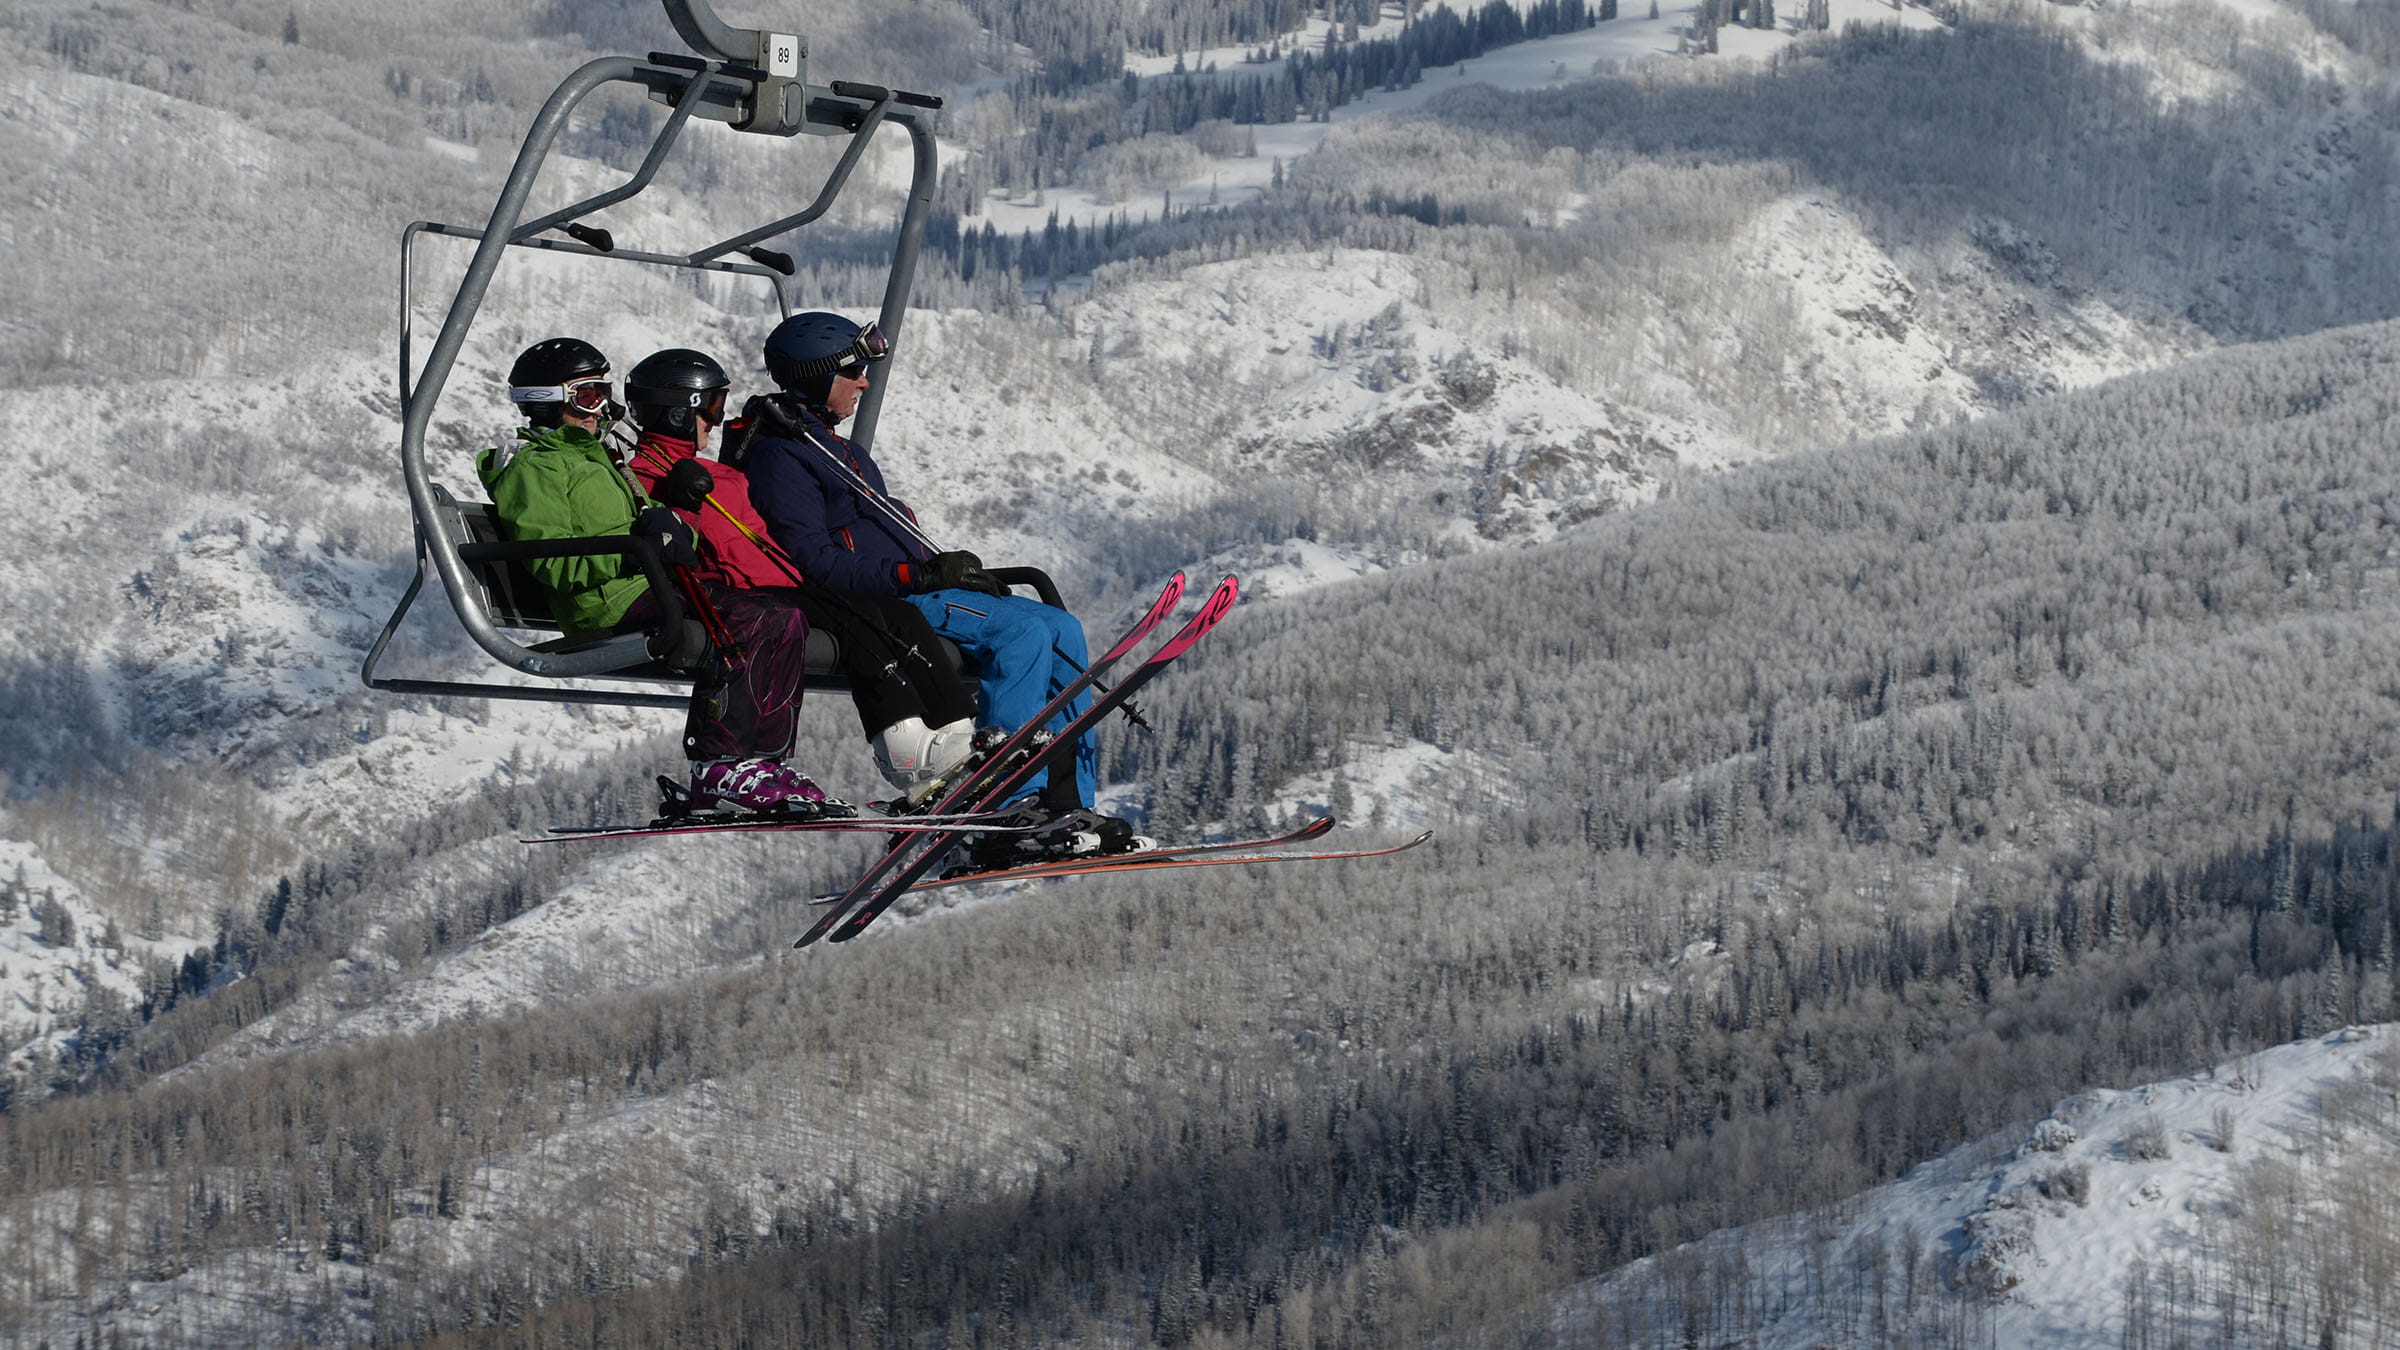 Lift Tickets for Group Reservations in Steamboat